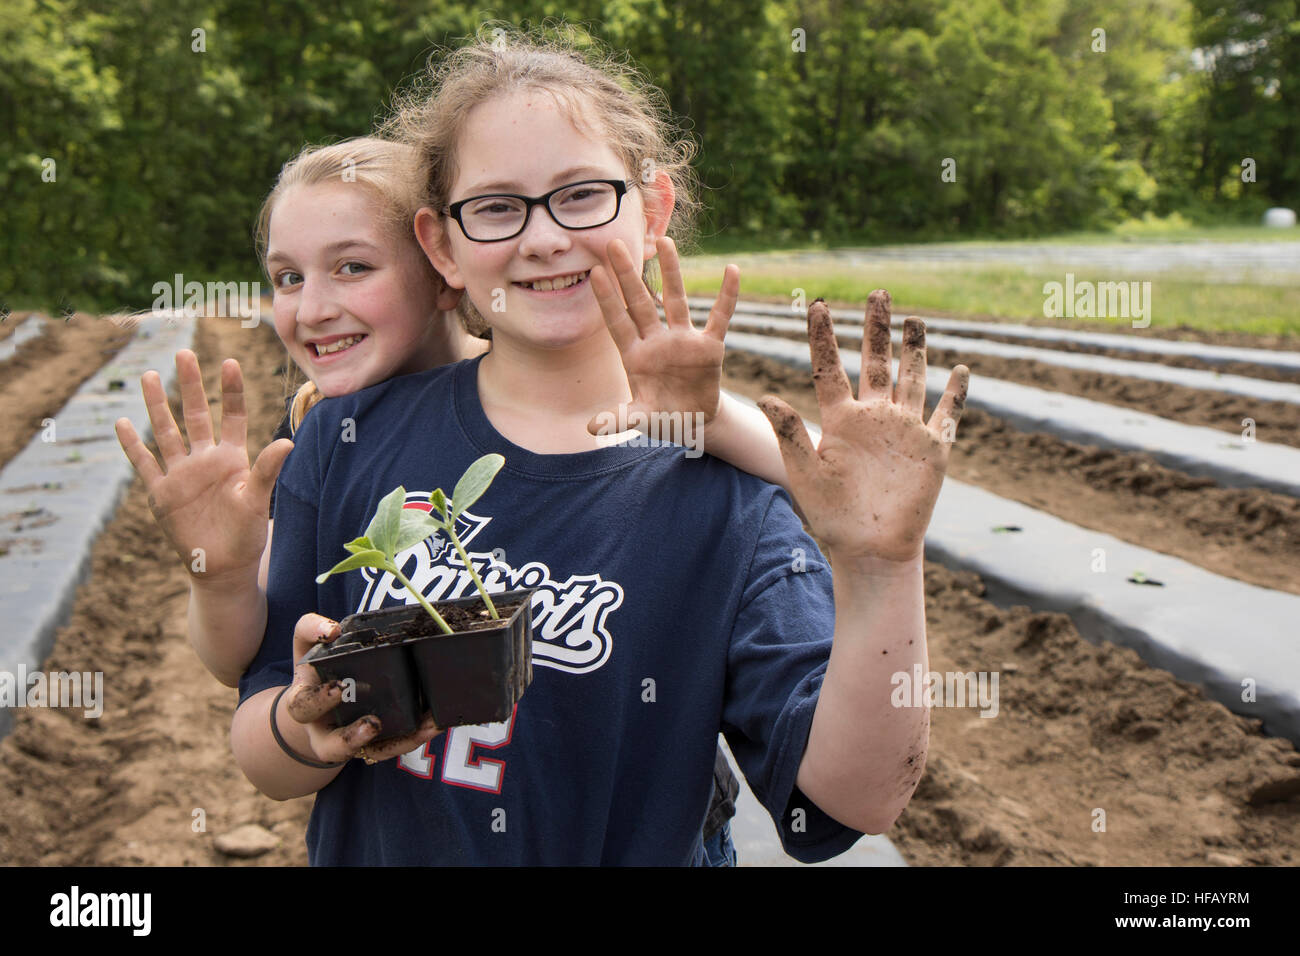 two girls with dirty hands from garden work Stock Photo